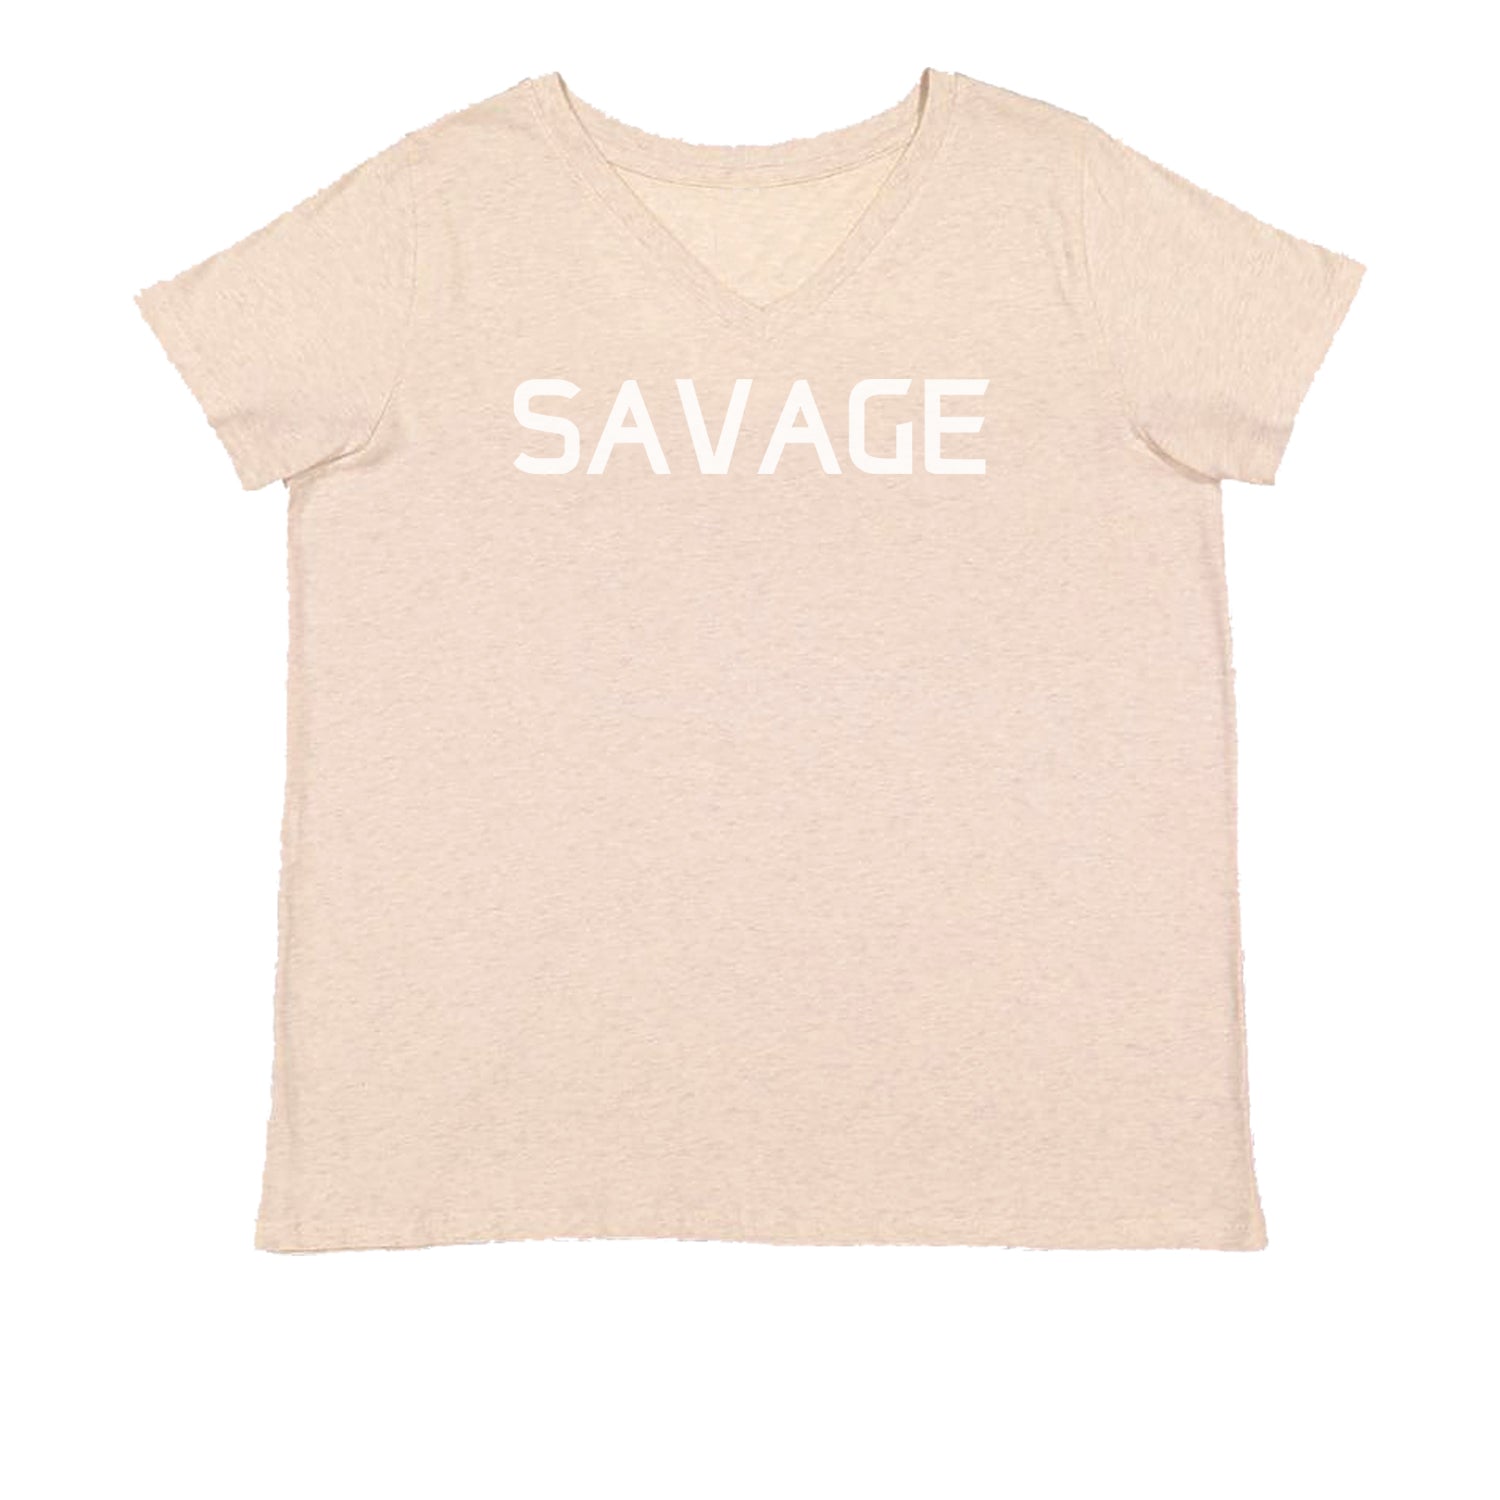 Savage Womens Plus Size V-Neck T-shirt #expressiontees by Expression Tees